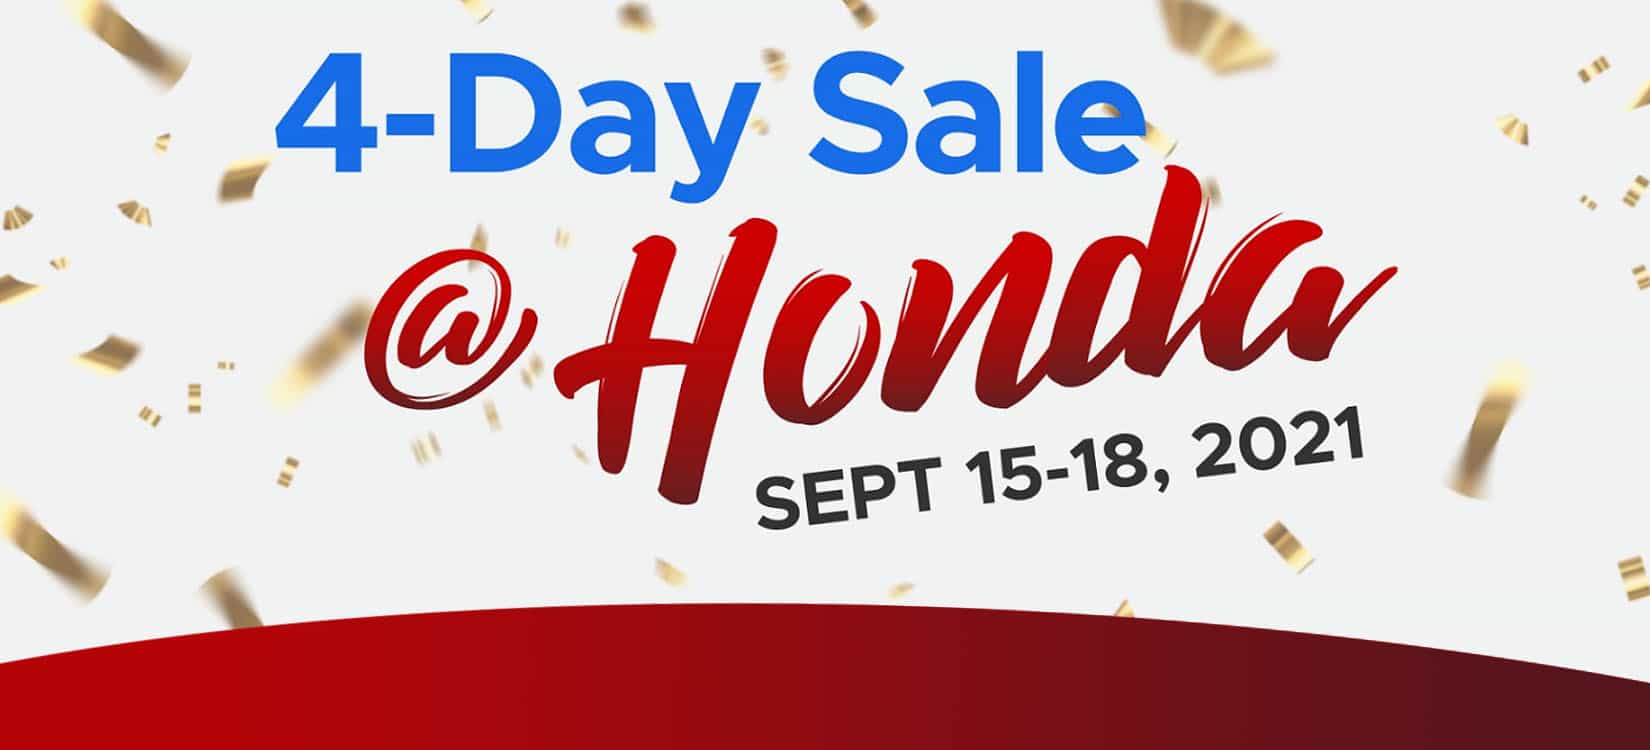 Honda welcomes the season of giving with its 4-Day Sale this September